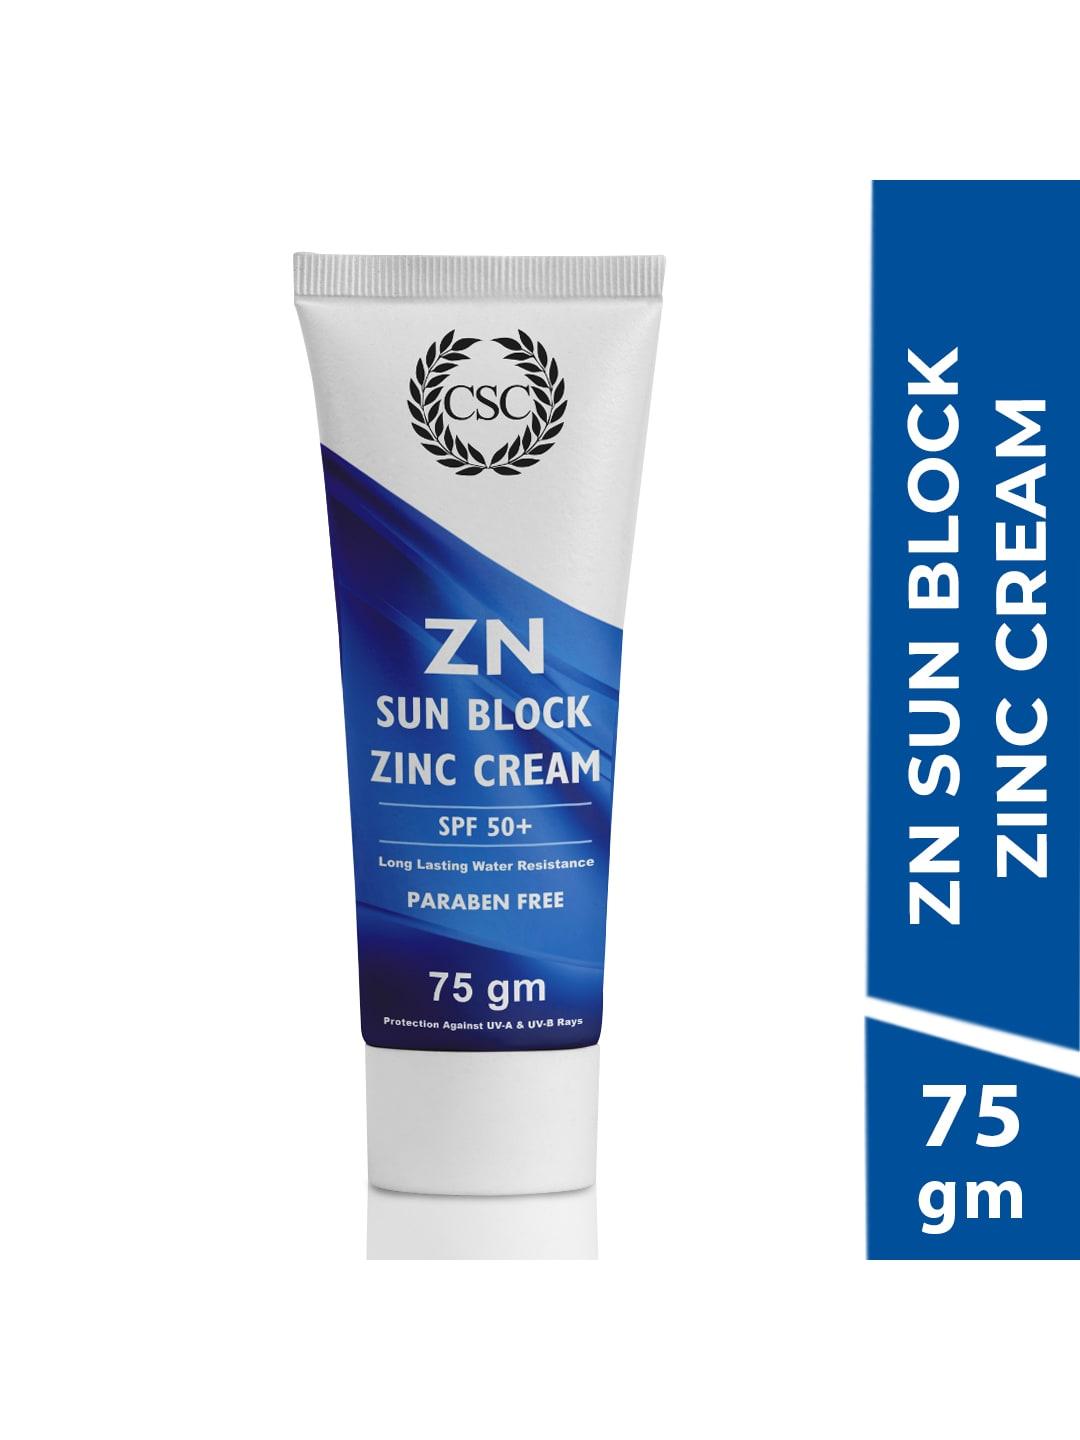 CSC ZN Sunblock White Zinc Oxide SPF50+ Broad Spectrum Sunscreen for Cricketers - 75g